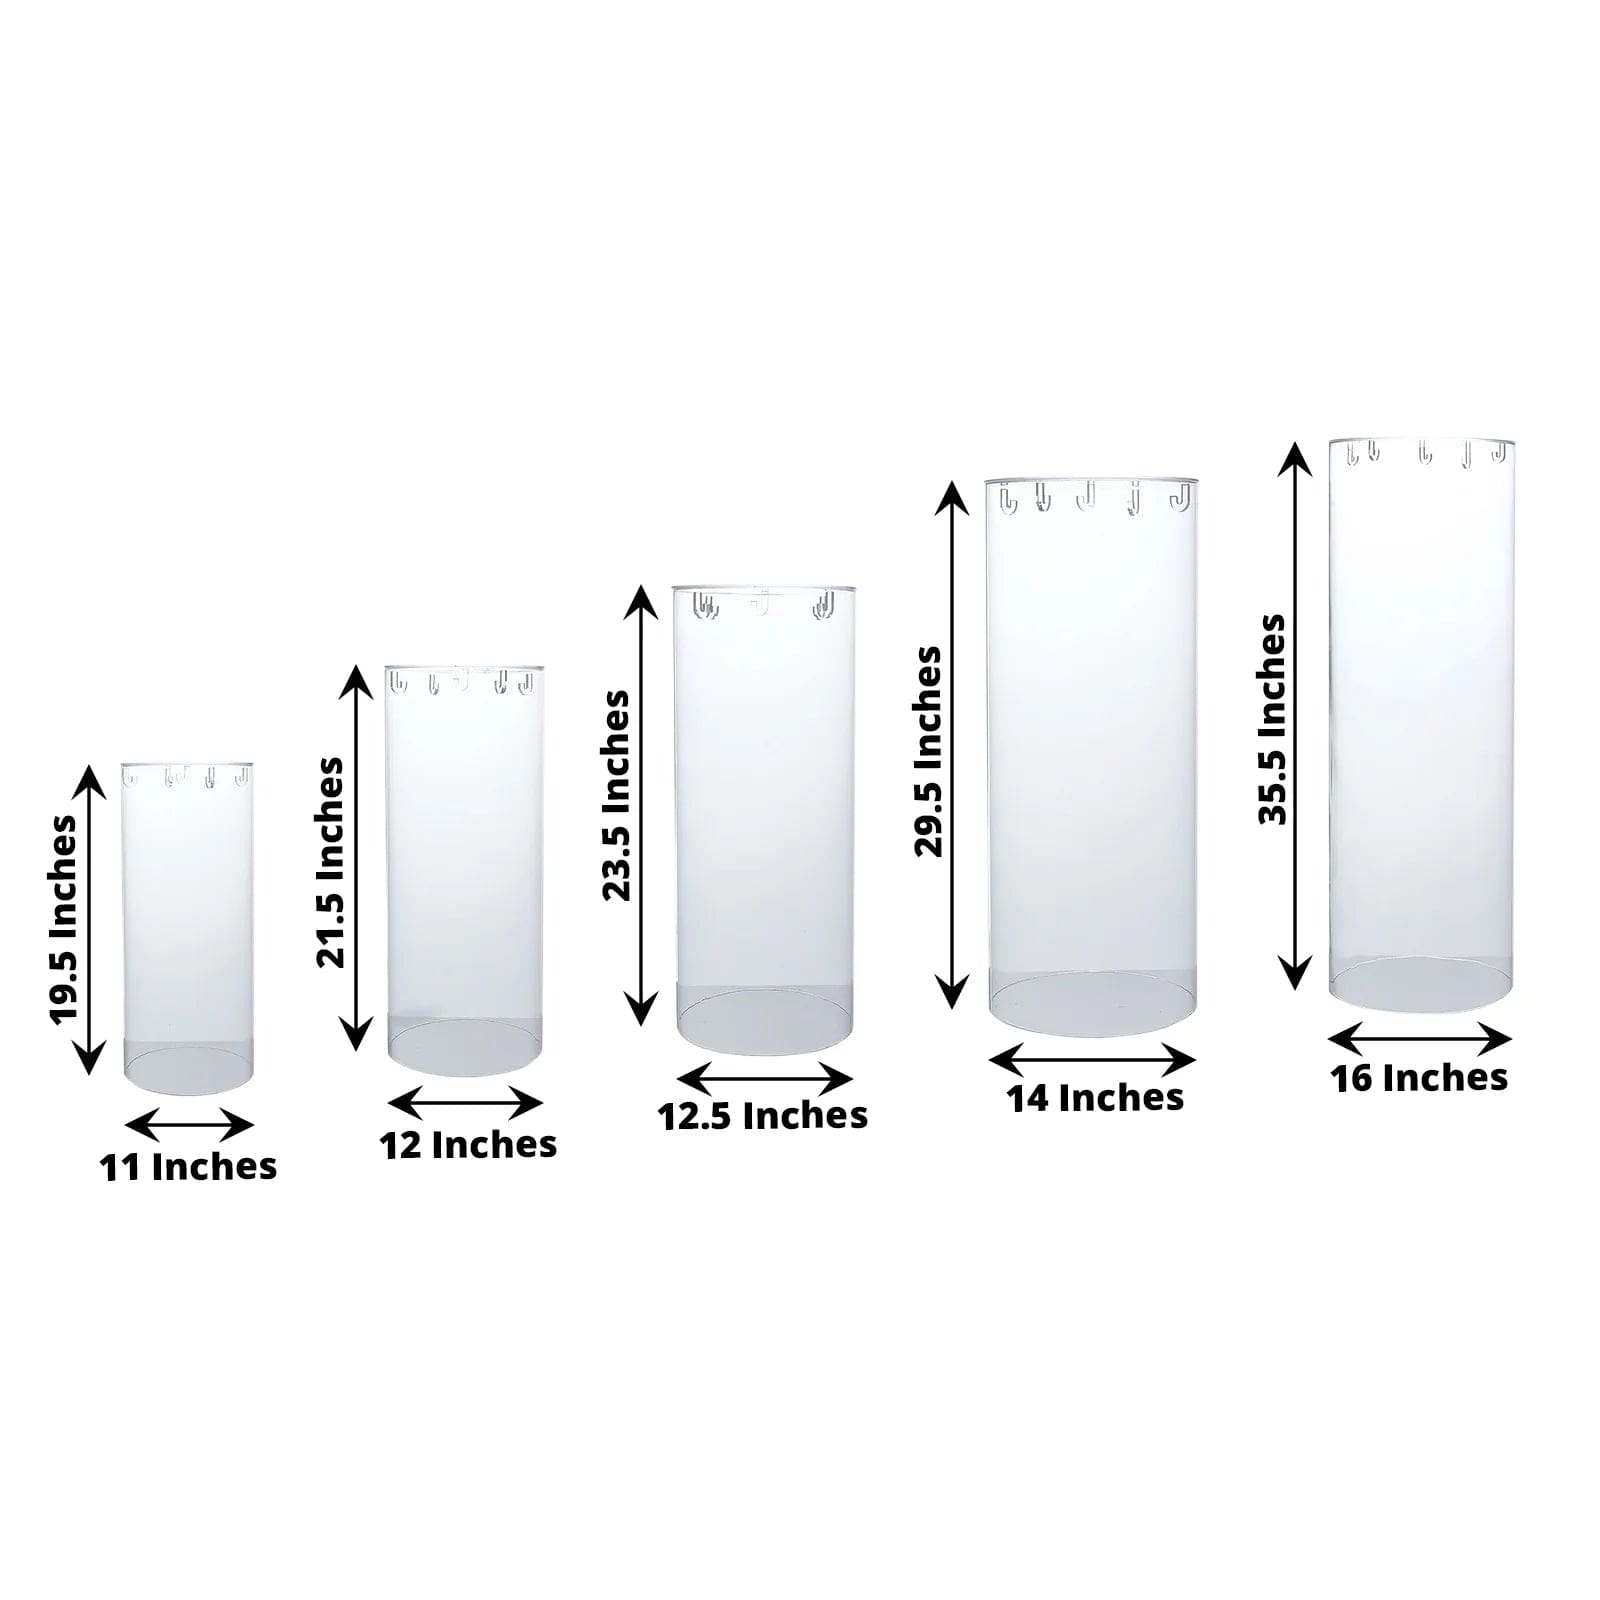 5 Clear Cylinder Acrylic Stands Display Boxes Pedestal Riser Columns